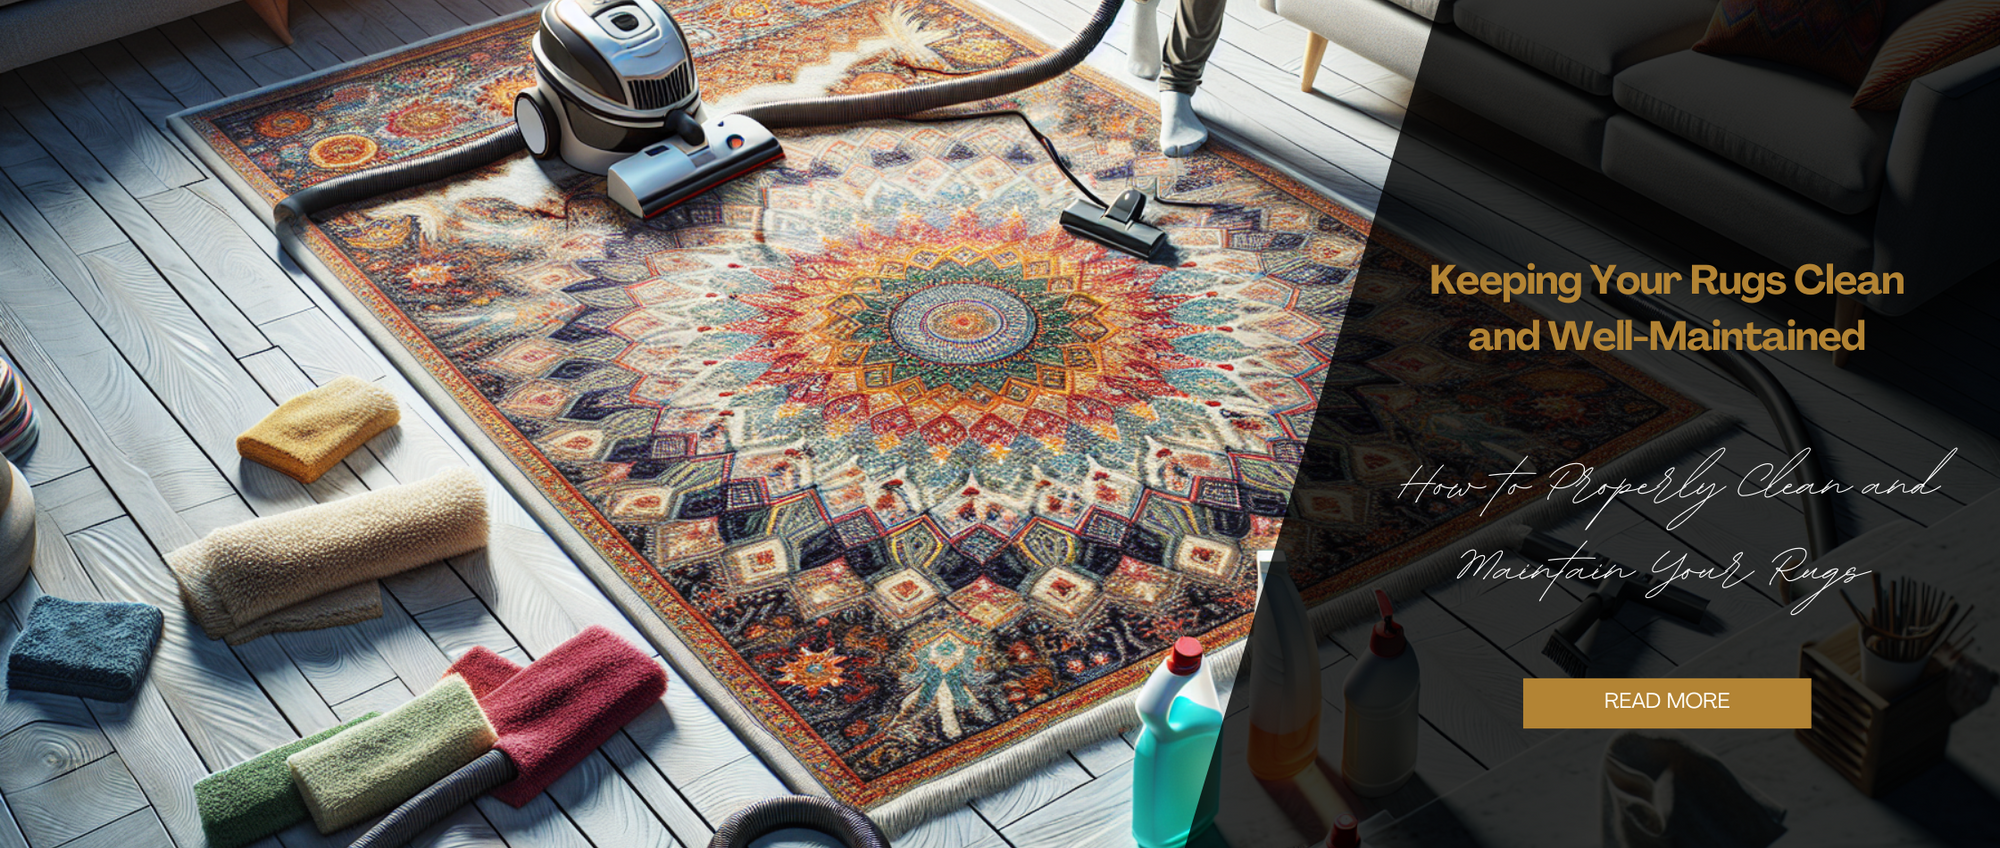 How to Properly Clean and Maintain Your Rugs in New Zealand